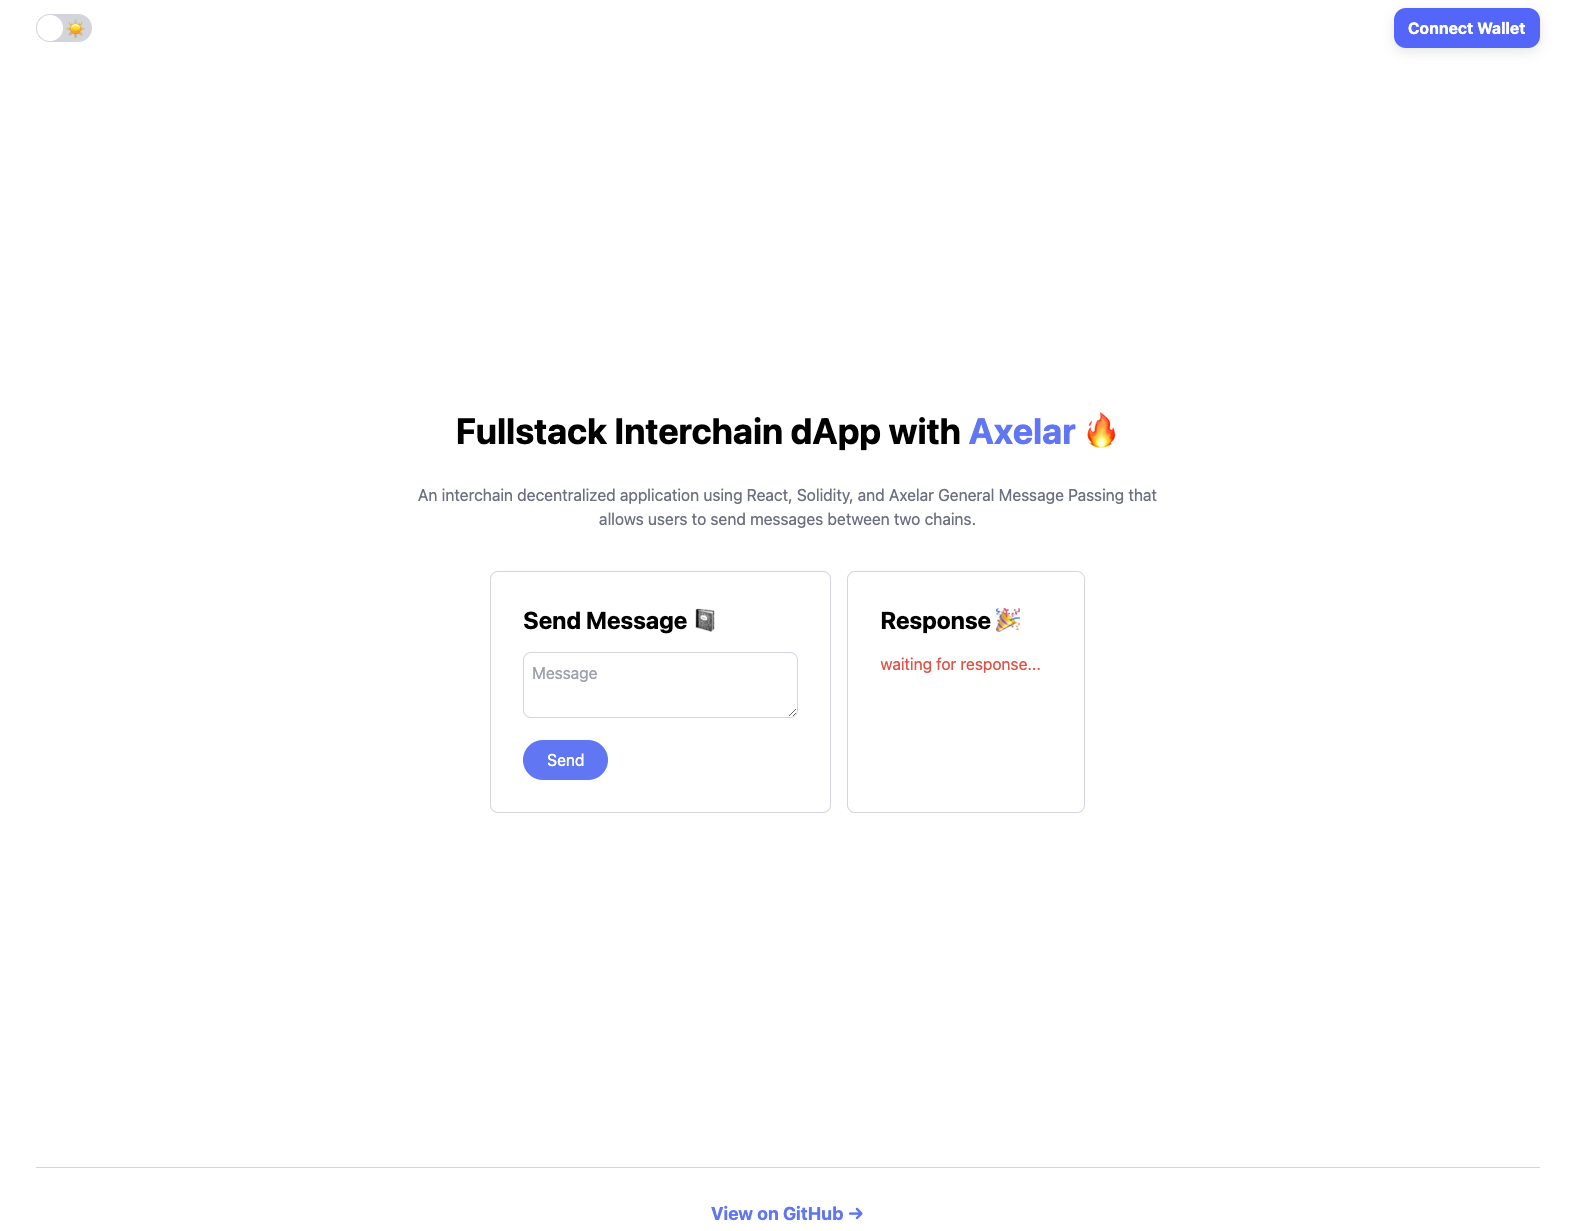 Build a Full Stack Interchain dApp with Next.js, Solidity & Axelar